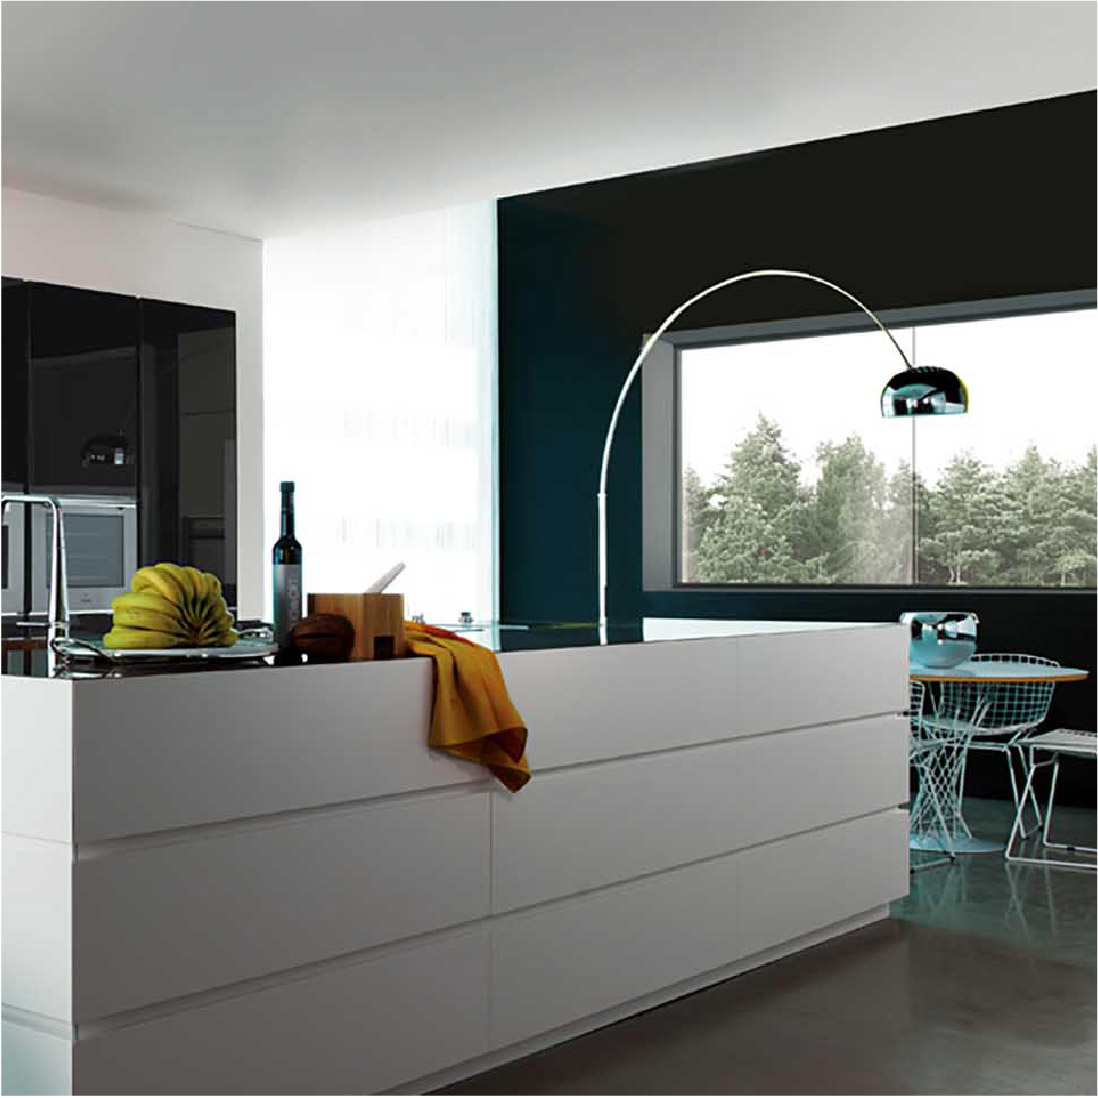 Modern kitchen interior with sleek white cabinetry, a large window overlooking a forest, and an arched floor lamp over an island. The decor includes a bowl of lemons and minimalist graphic design